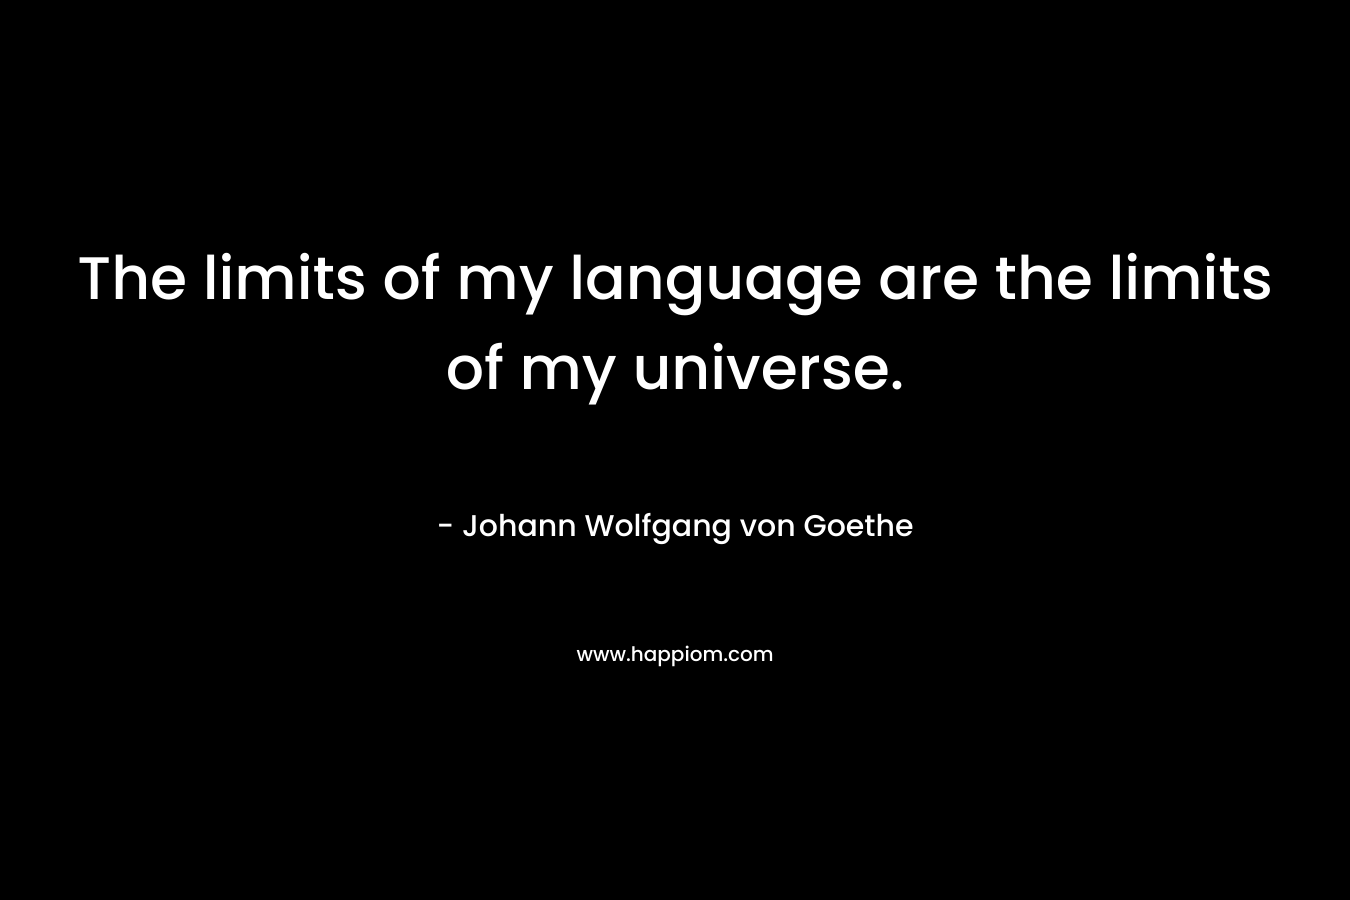 The limits of my language are the limits of my universe.